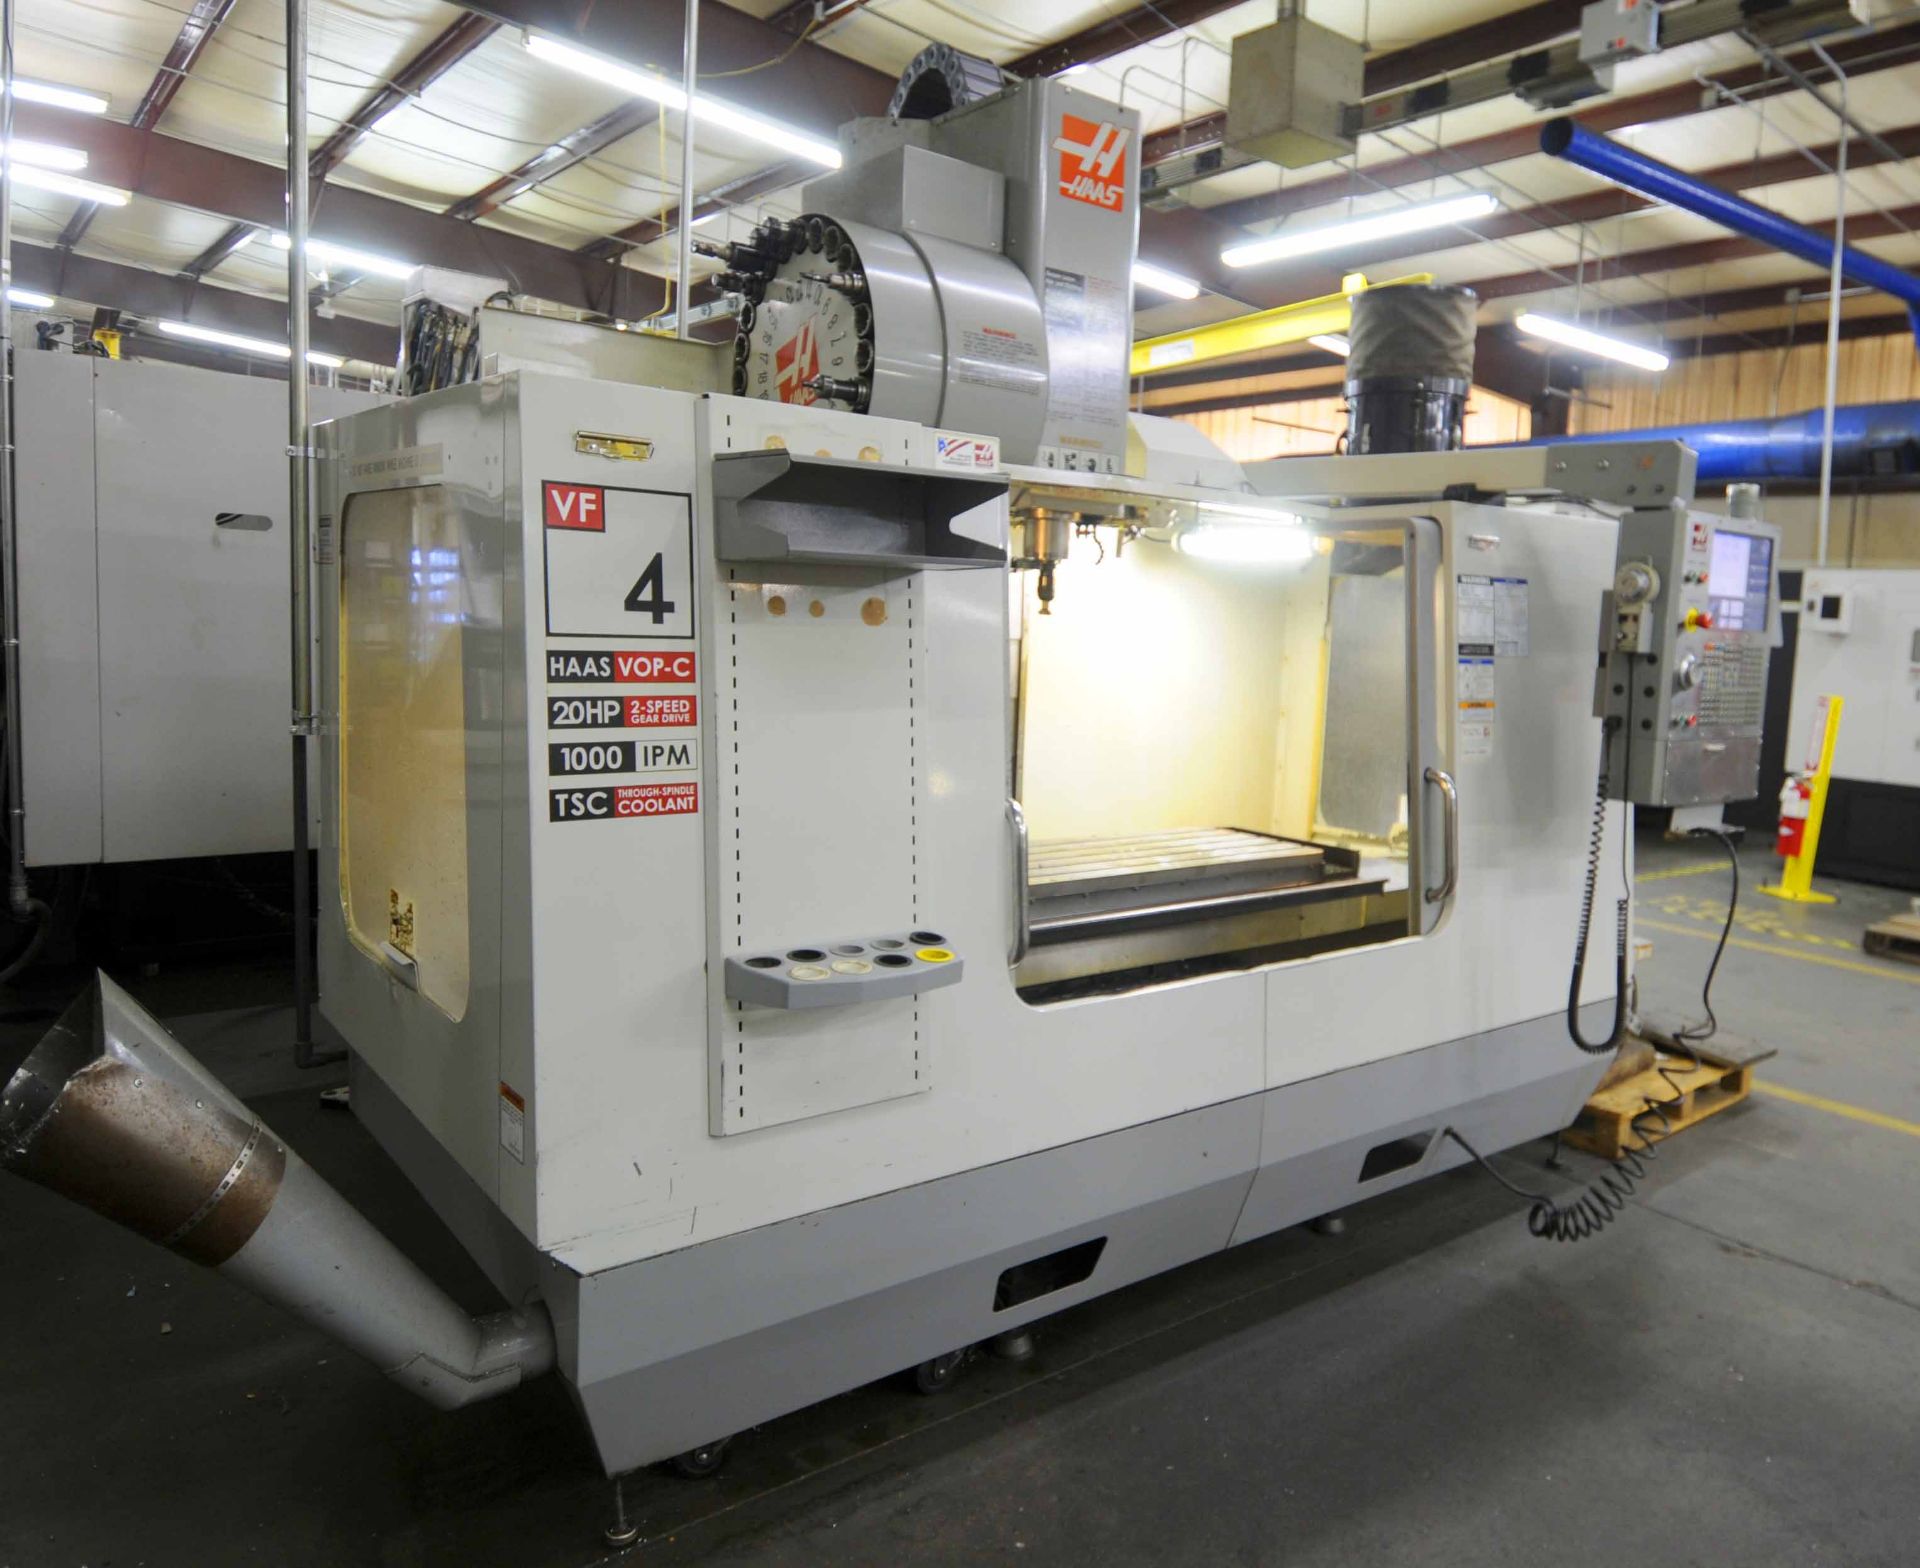 VERTICAL MACHINING CENTER, HAAS MDL. VF-4B 4-AXIS, new 2007, 18” x 52” table, 3,500 lb. table - Image 2 of 4